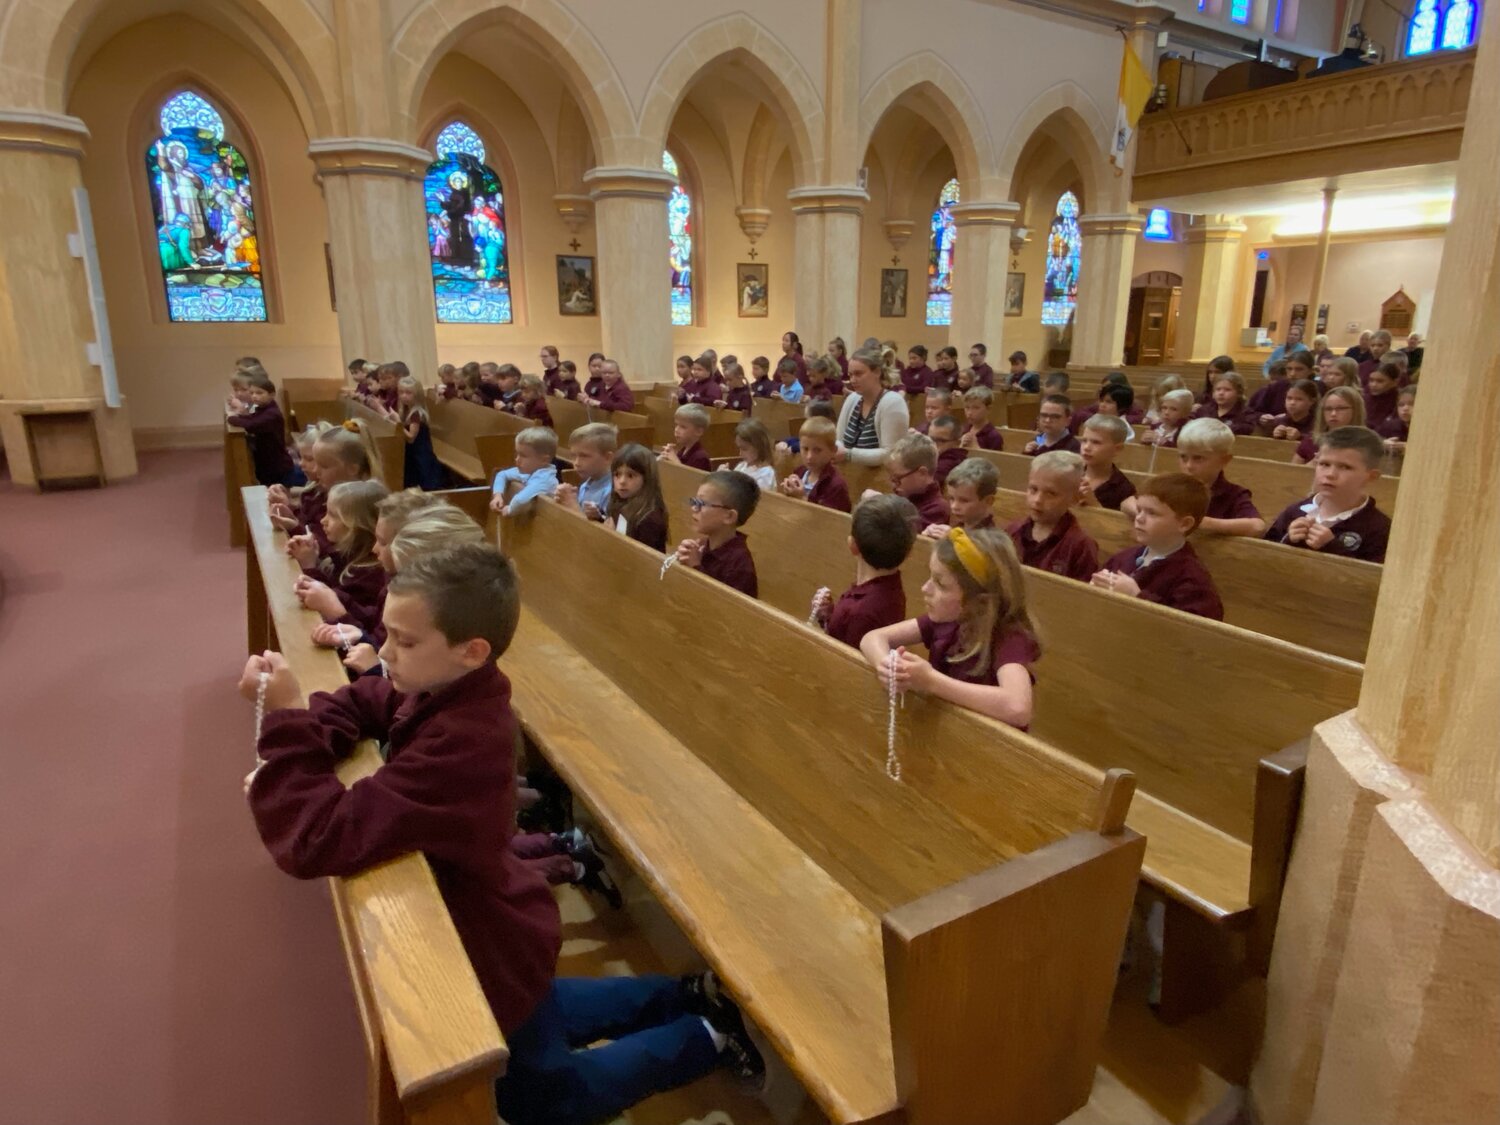 Students of St. George School in Hermann gather in church to pray the Rosary together.